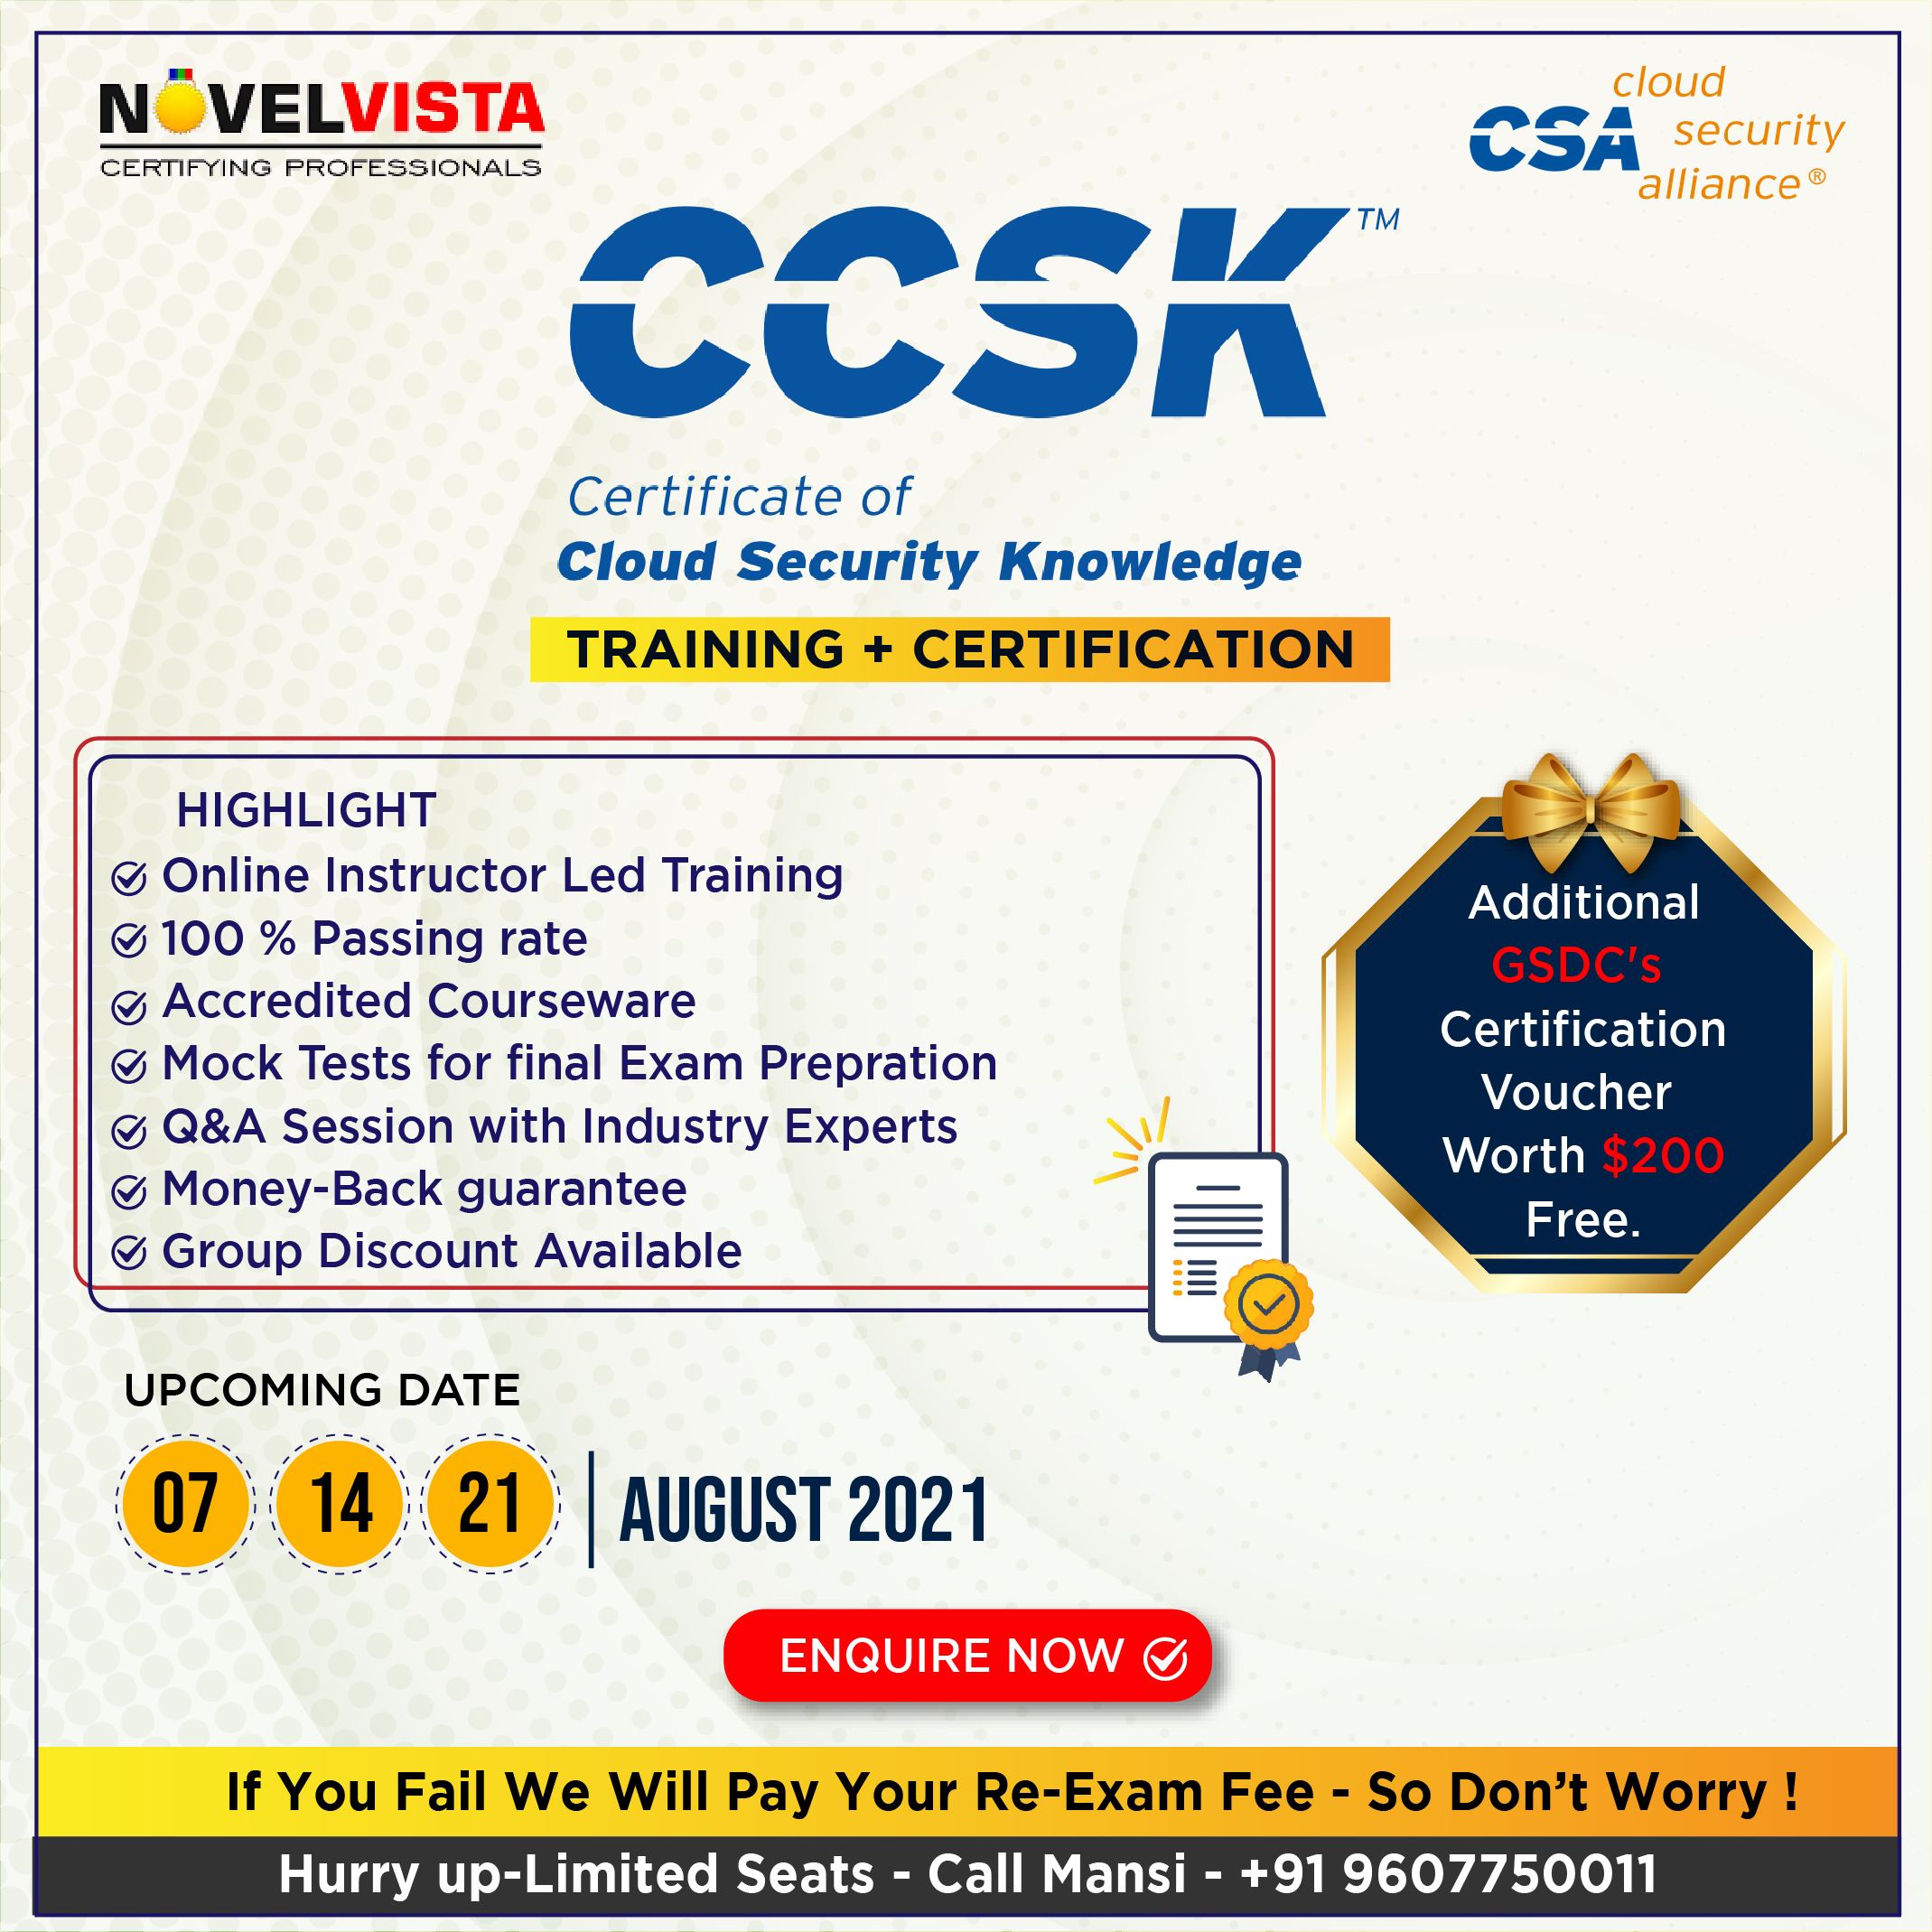 Join Our Certificate of Cloud Security Knowledge(CCSK) Training and Certification Program., Pune, Maharashtra, India